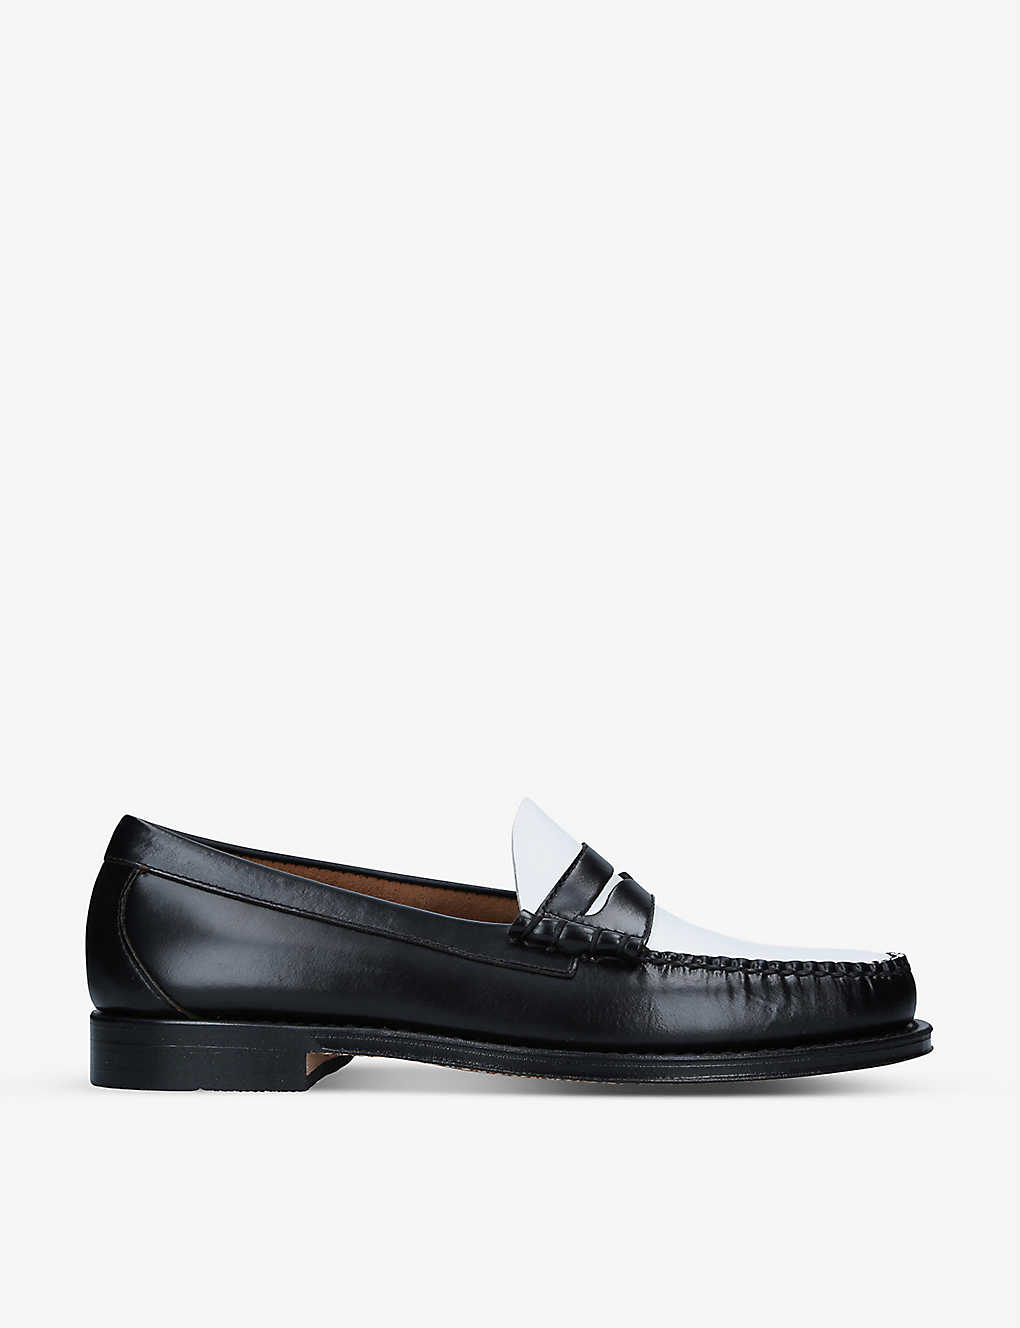 Bass Weejuns Larkin Two-tone Leather Penny Loafers In Black